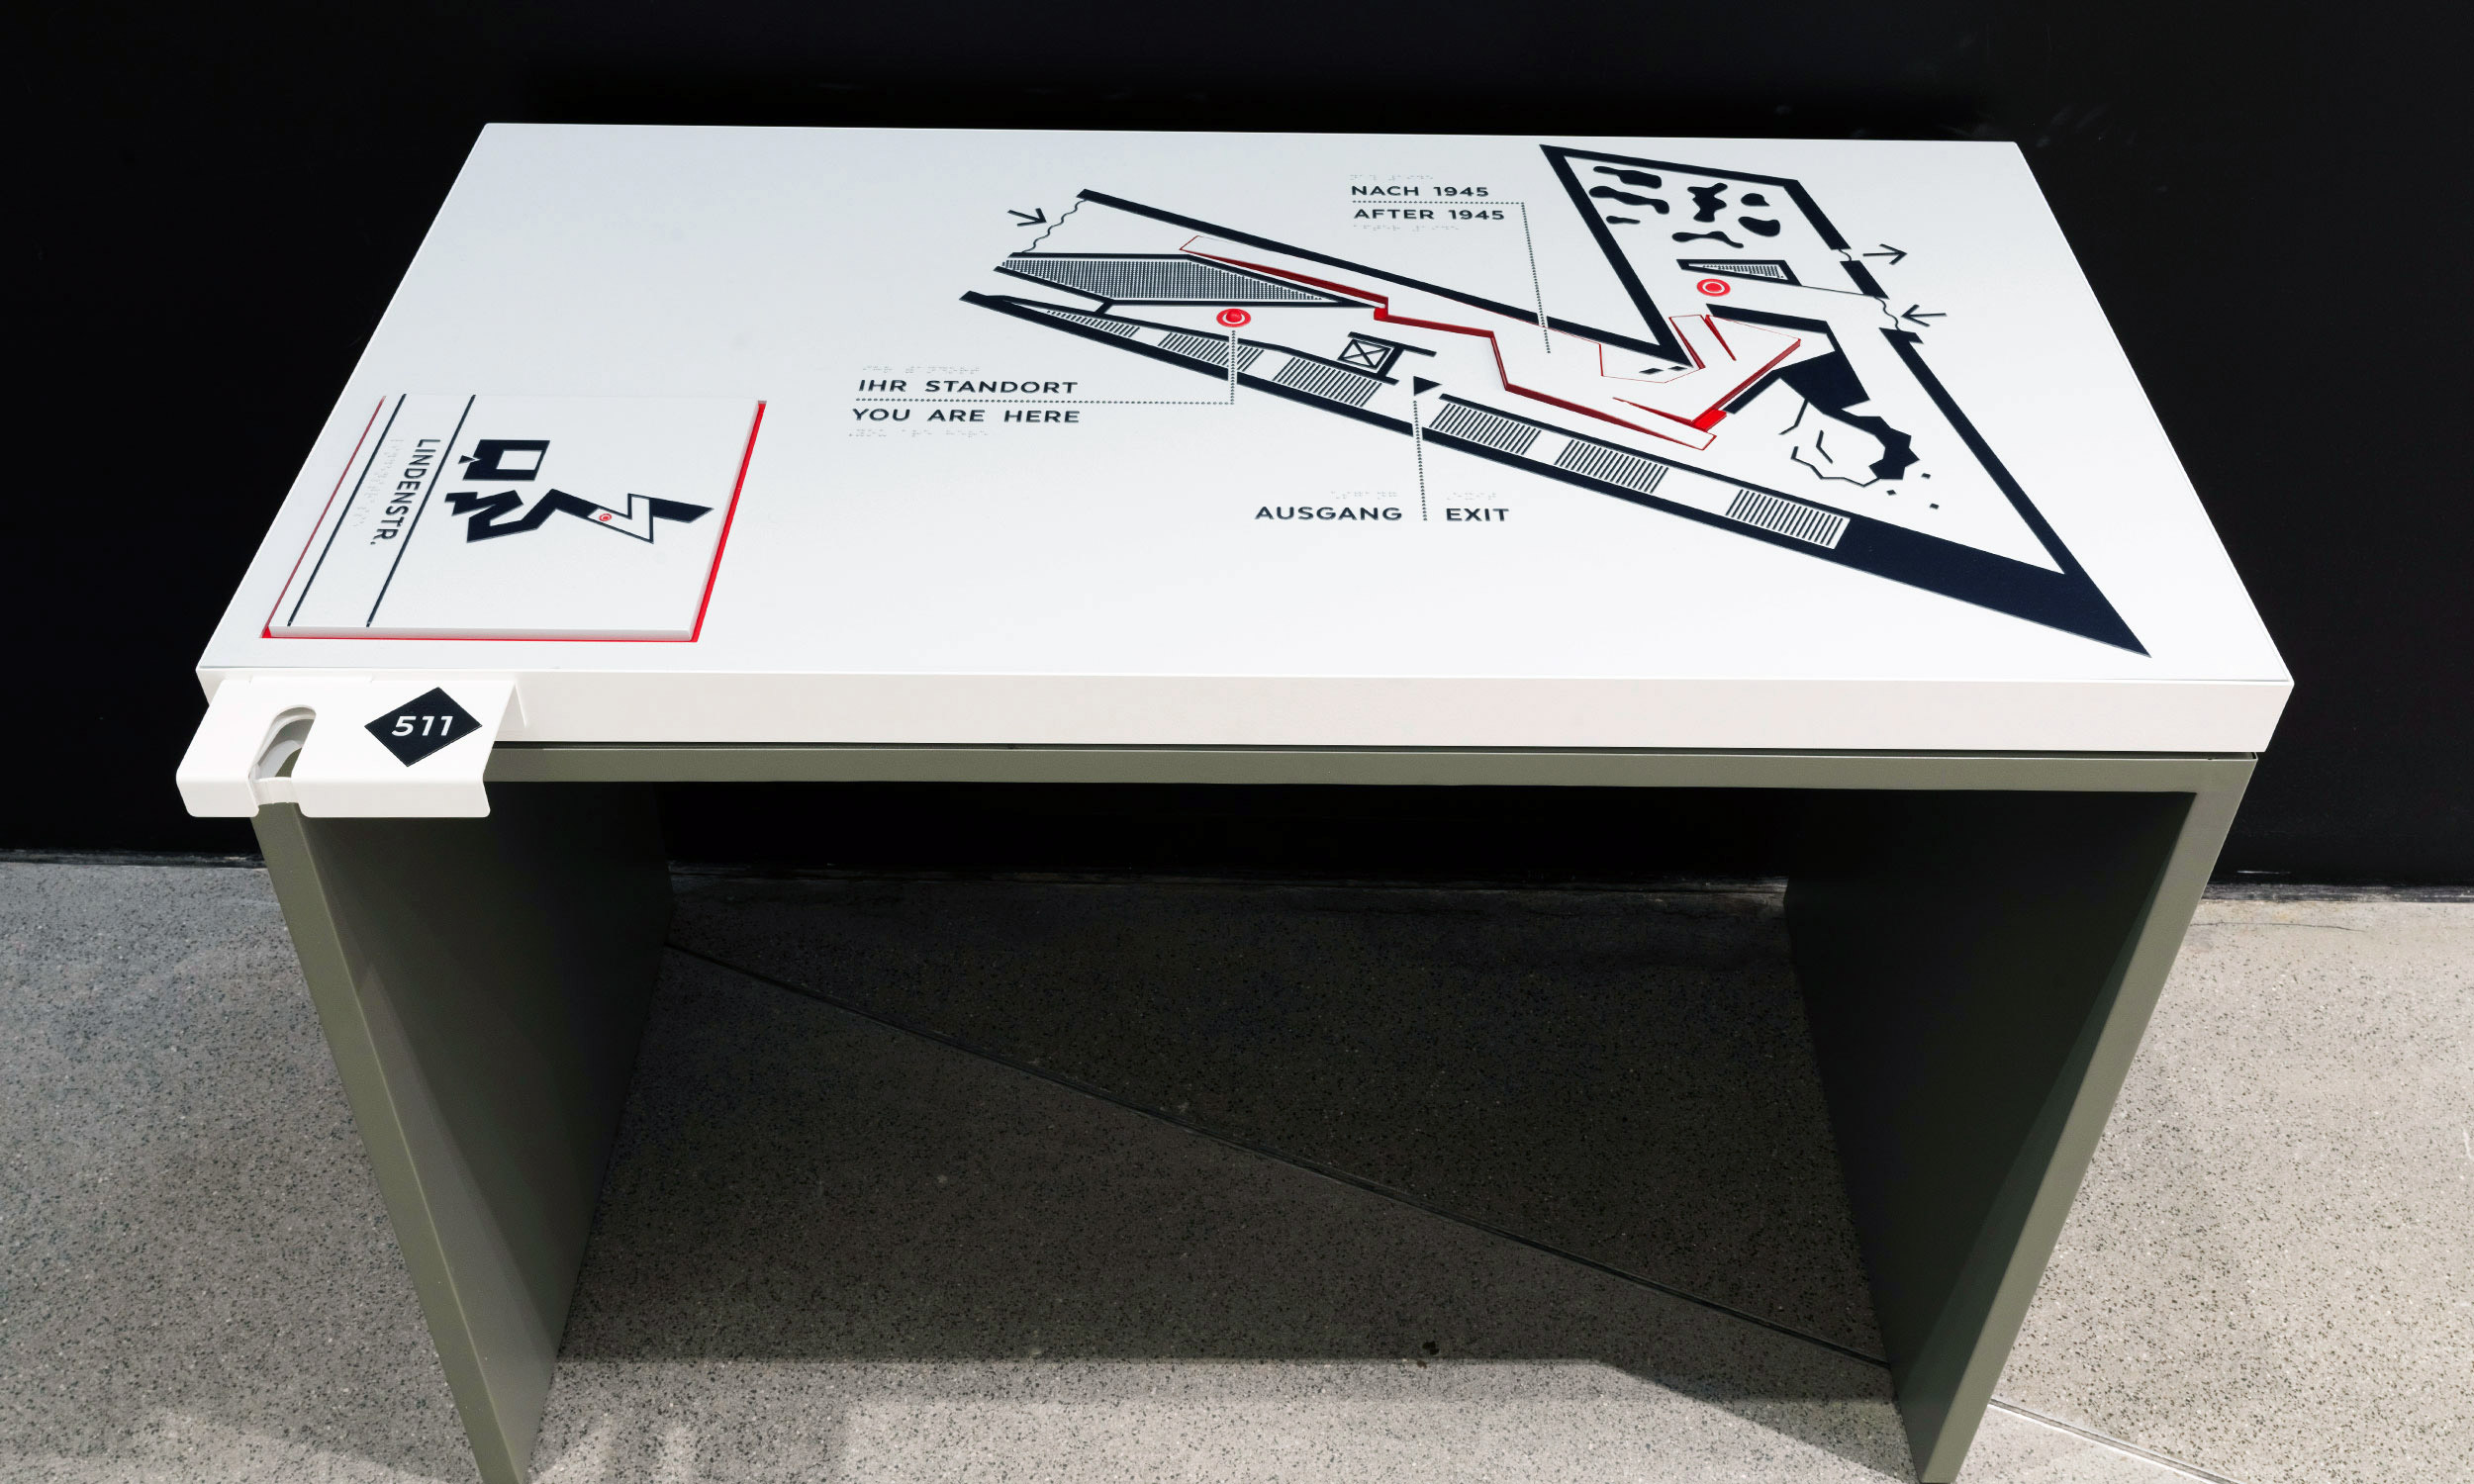 Photo of the tactile map on a table for orientation in the Jewish Museum in Berlin. The tactile map shows on the right side the part of the museum where the visitor is right now. On the left side, smaller, you can see the entire museum building as a tactile plan. On the front left of the table is a cane holder with a number.